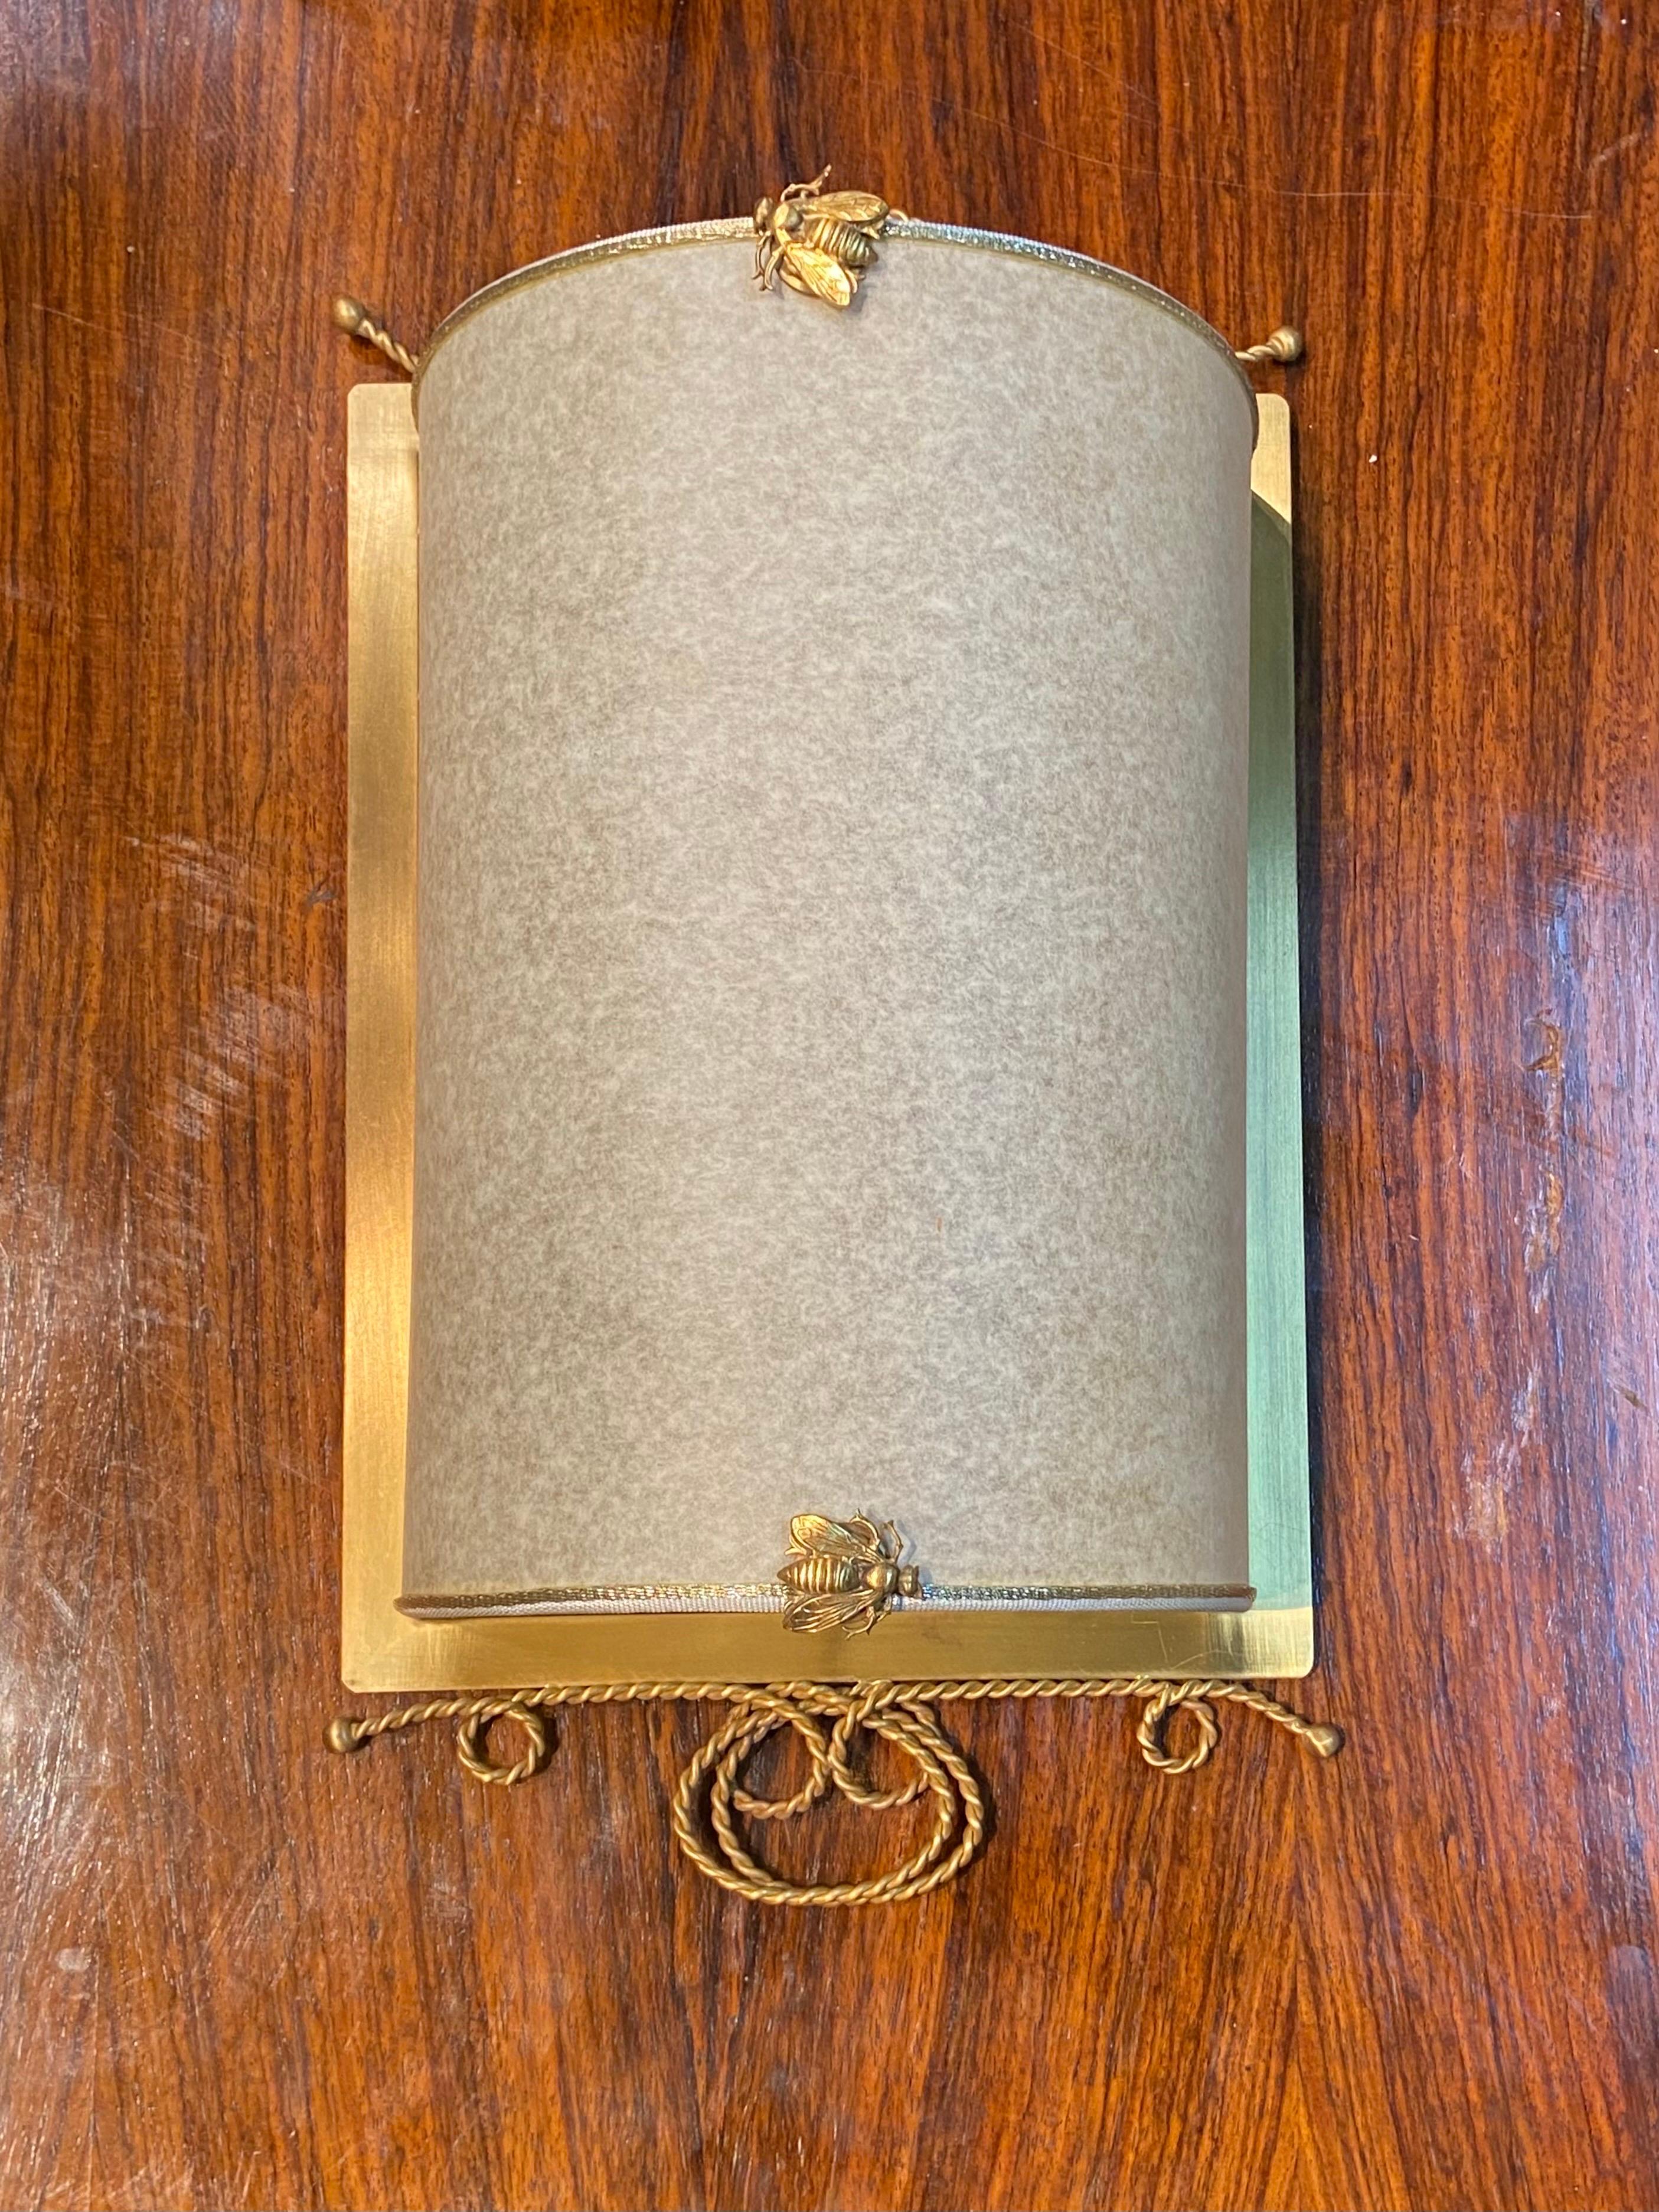 Midcentury French wall sconces made in brass and special paper and elegantly decorated with small brass bees. Price is for piece.
France, circa 1950.